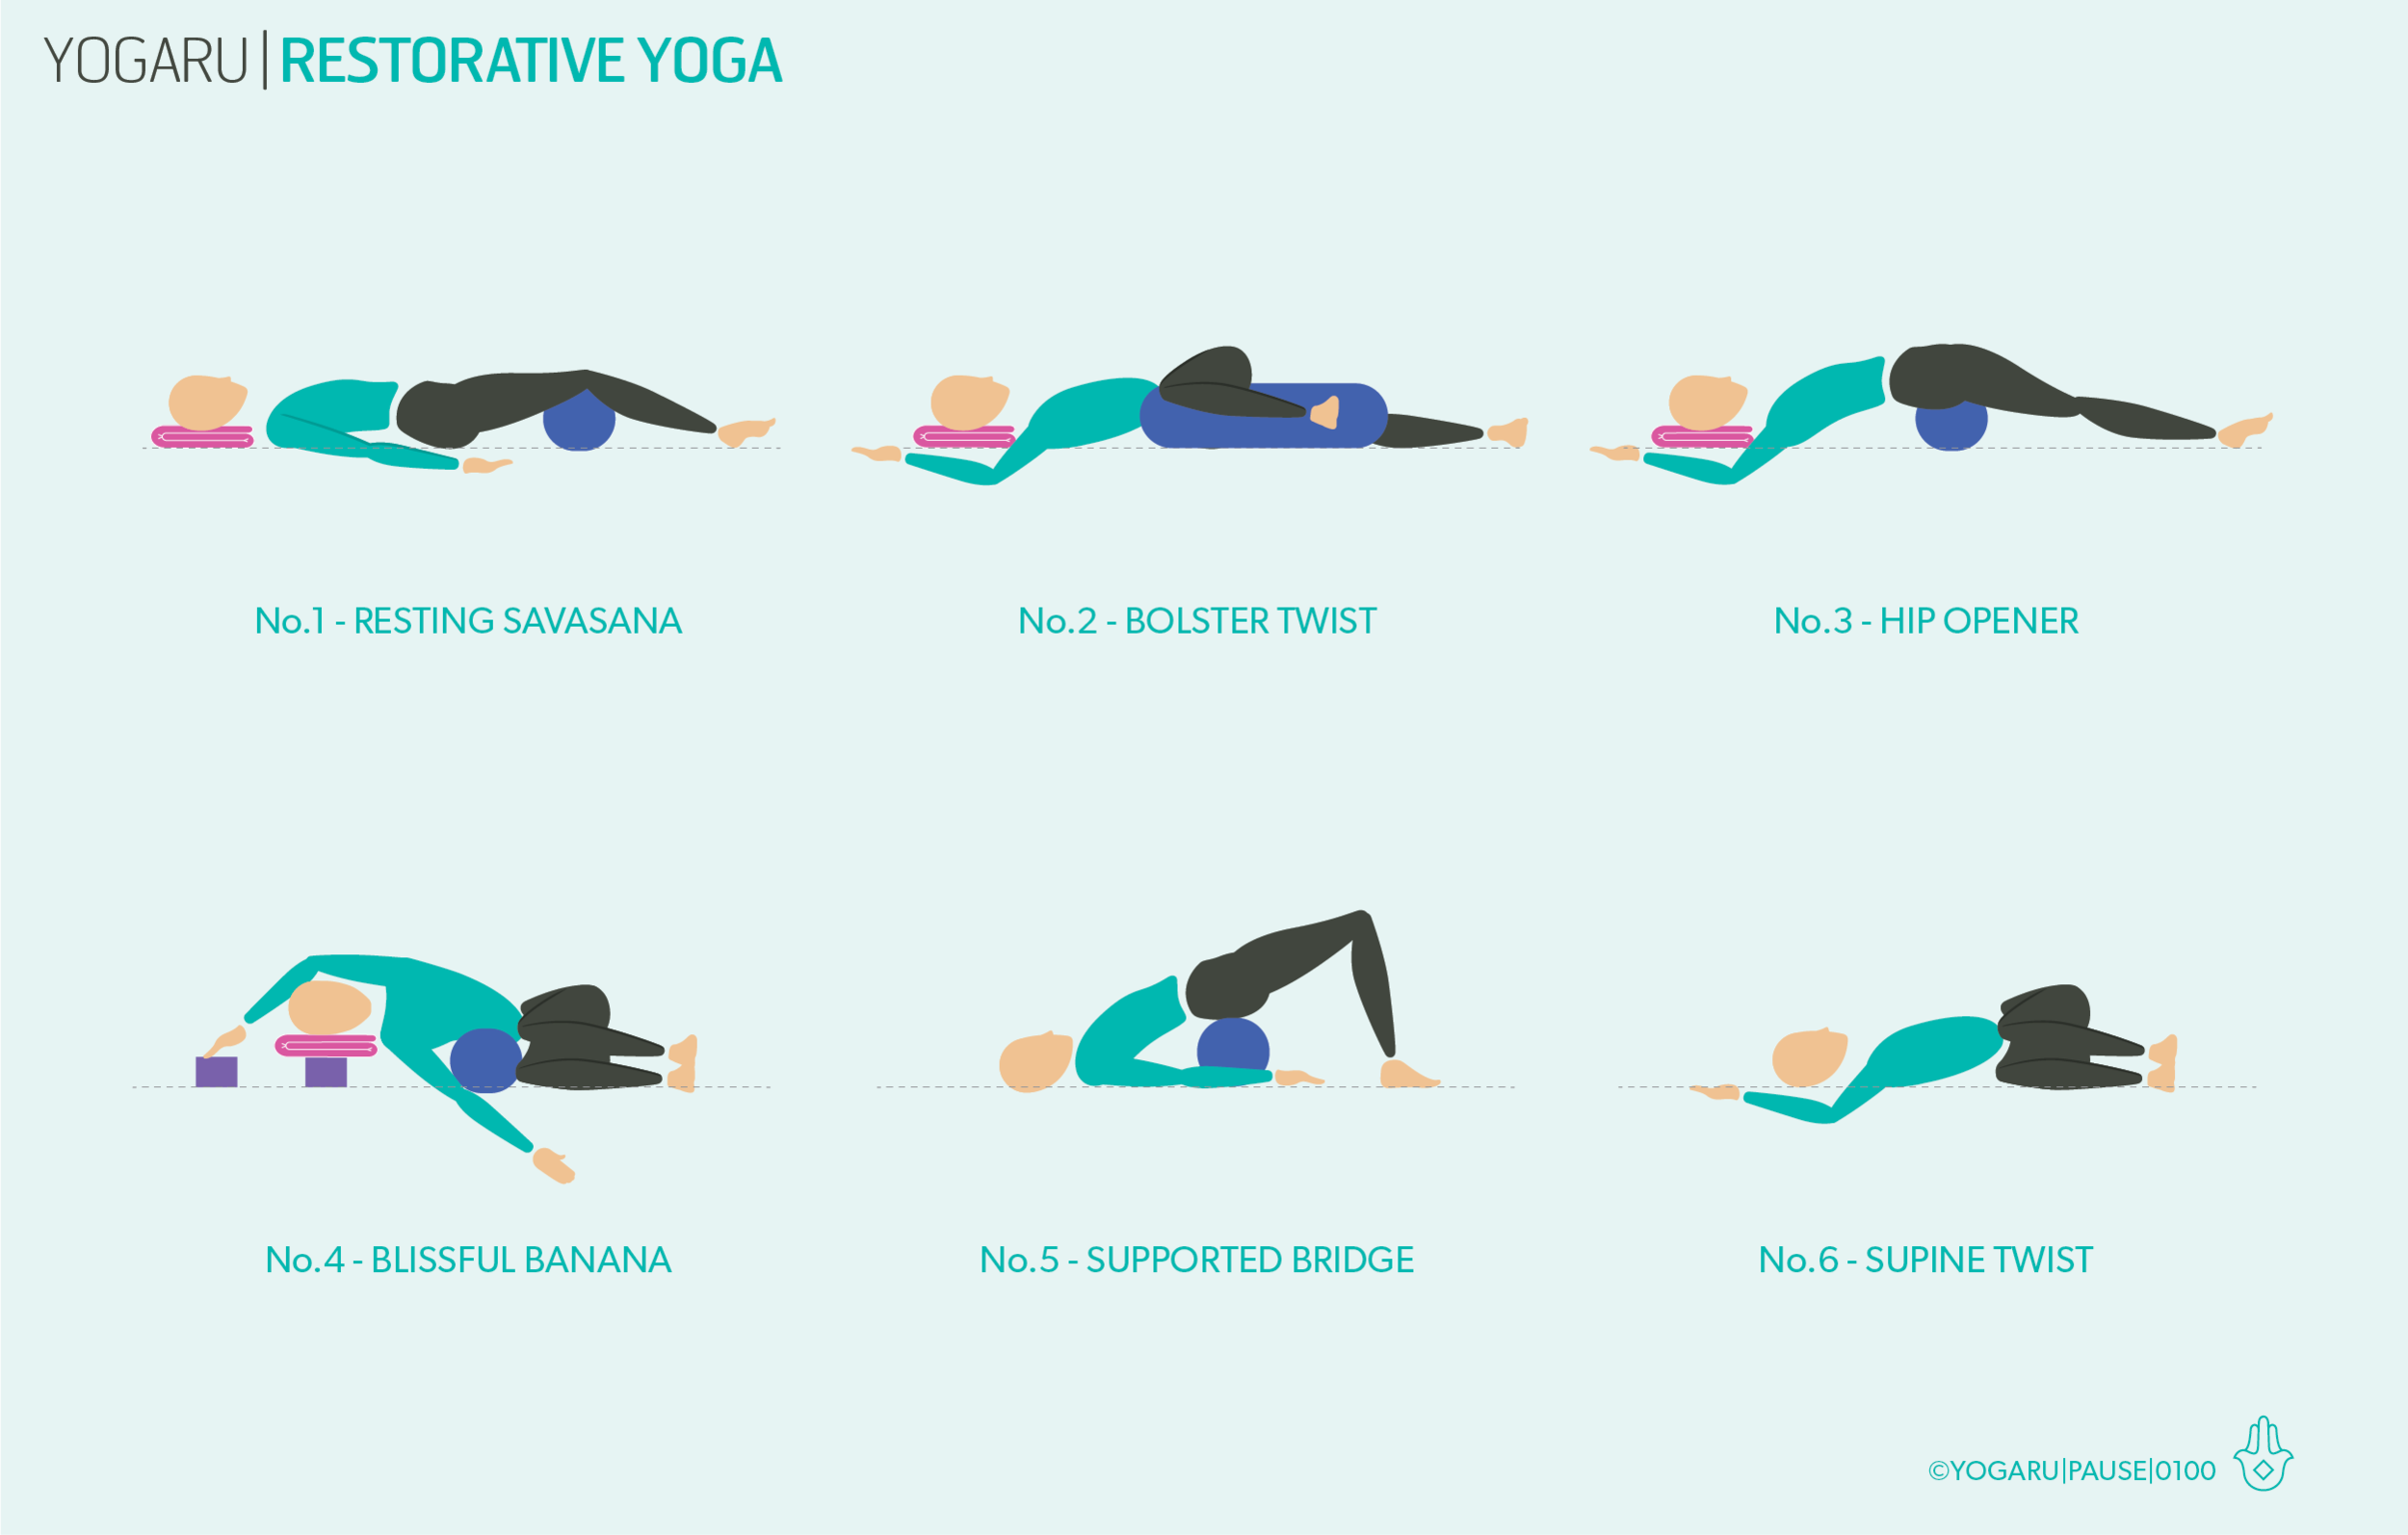 How to use a bolster for restorative yoga